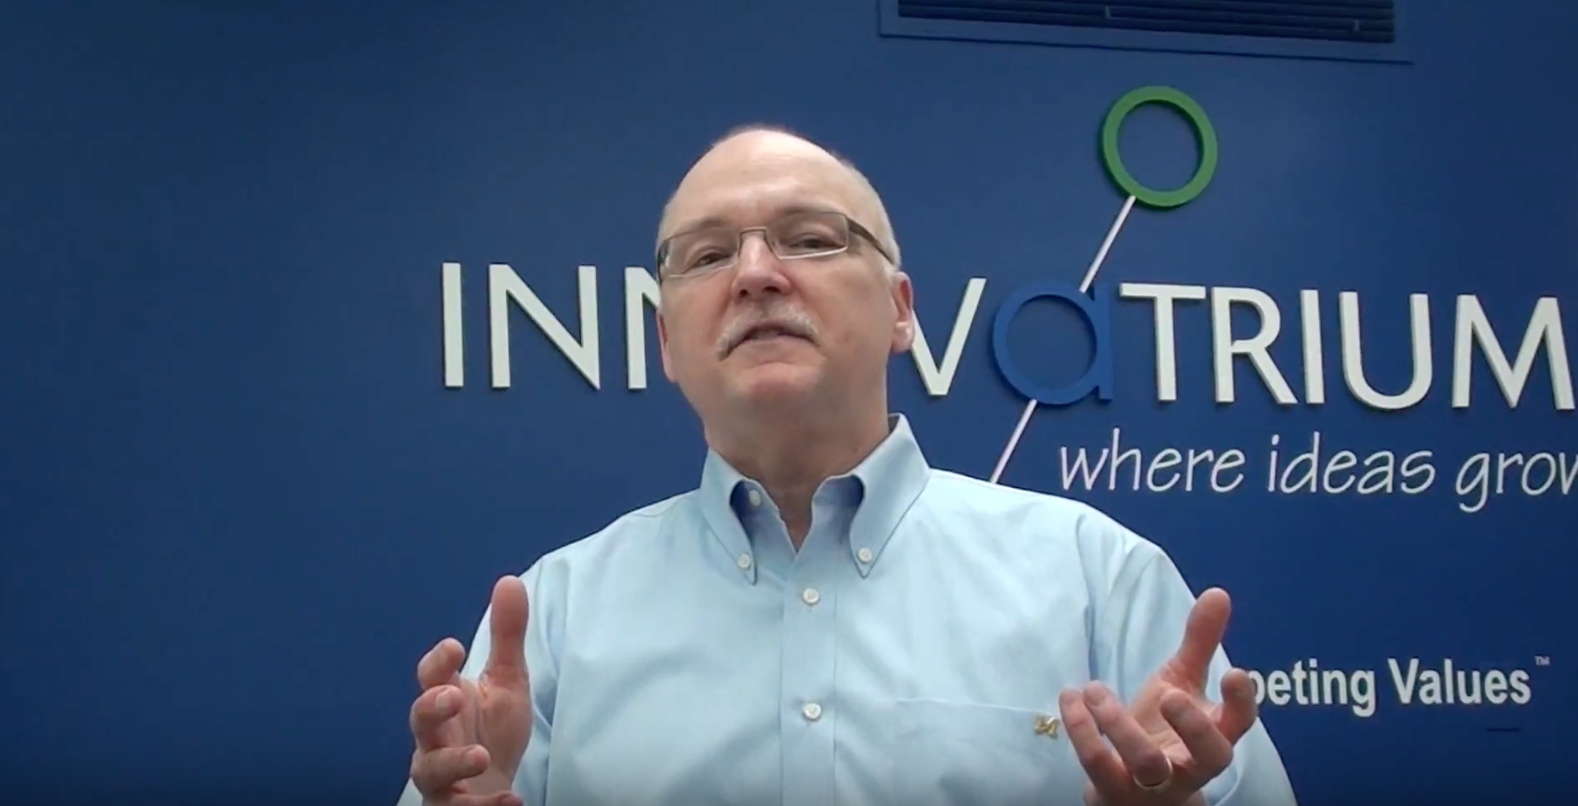 Jeff ism Video: How to Play the Innovation Game